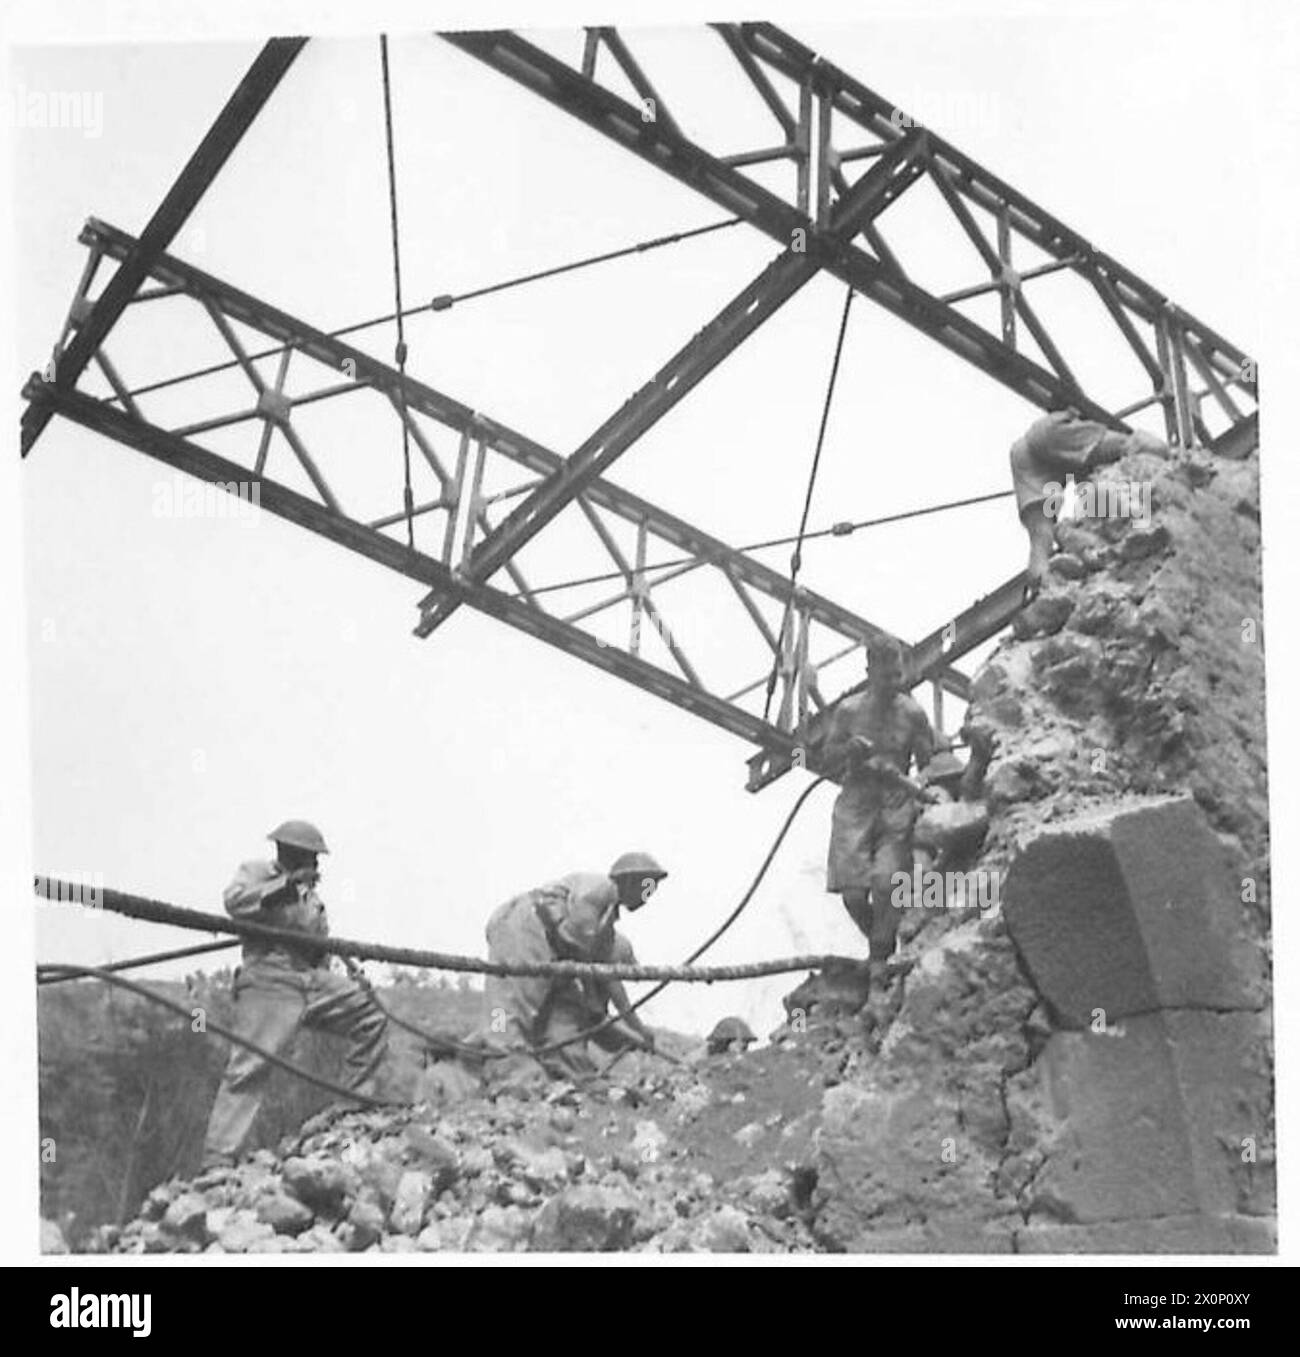 EIGHTH ARMY : BRITISH TROOPS IN ARCE - The bridge into Arce, which was blown by the Germans at night, was quickly replaced by a Bailey bridge which was almost completed by the morning. Royal Engineers and Bechuana Pioneers are seen at work on the bridge. Photographic negative , British Army Stock Photo